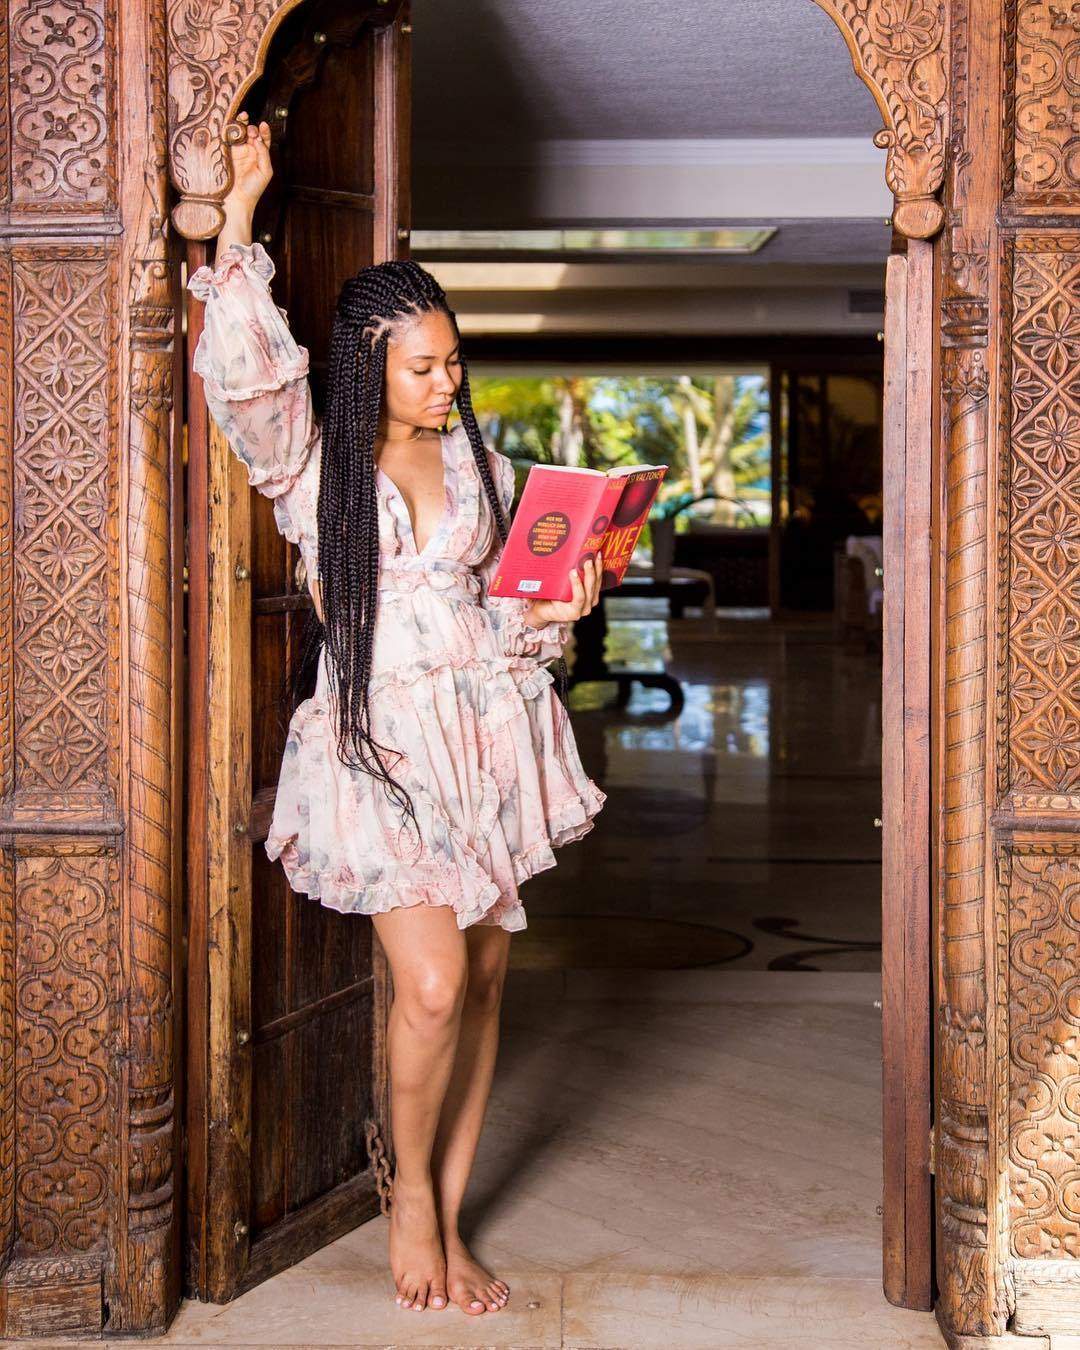 'I'll choose love over and over' - Anna Banner says as she shares delectable photos